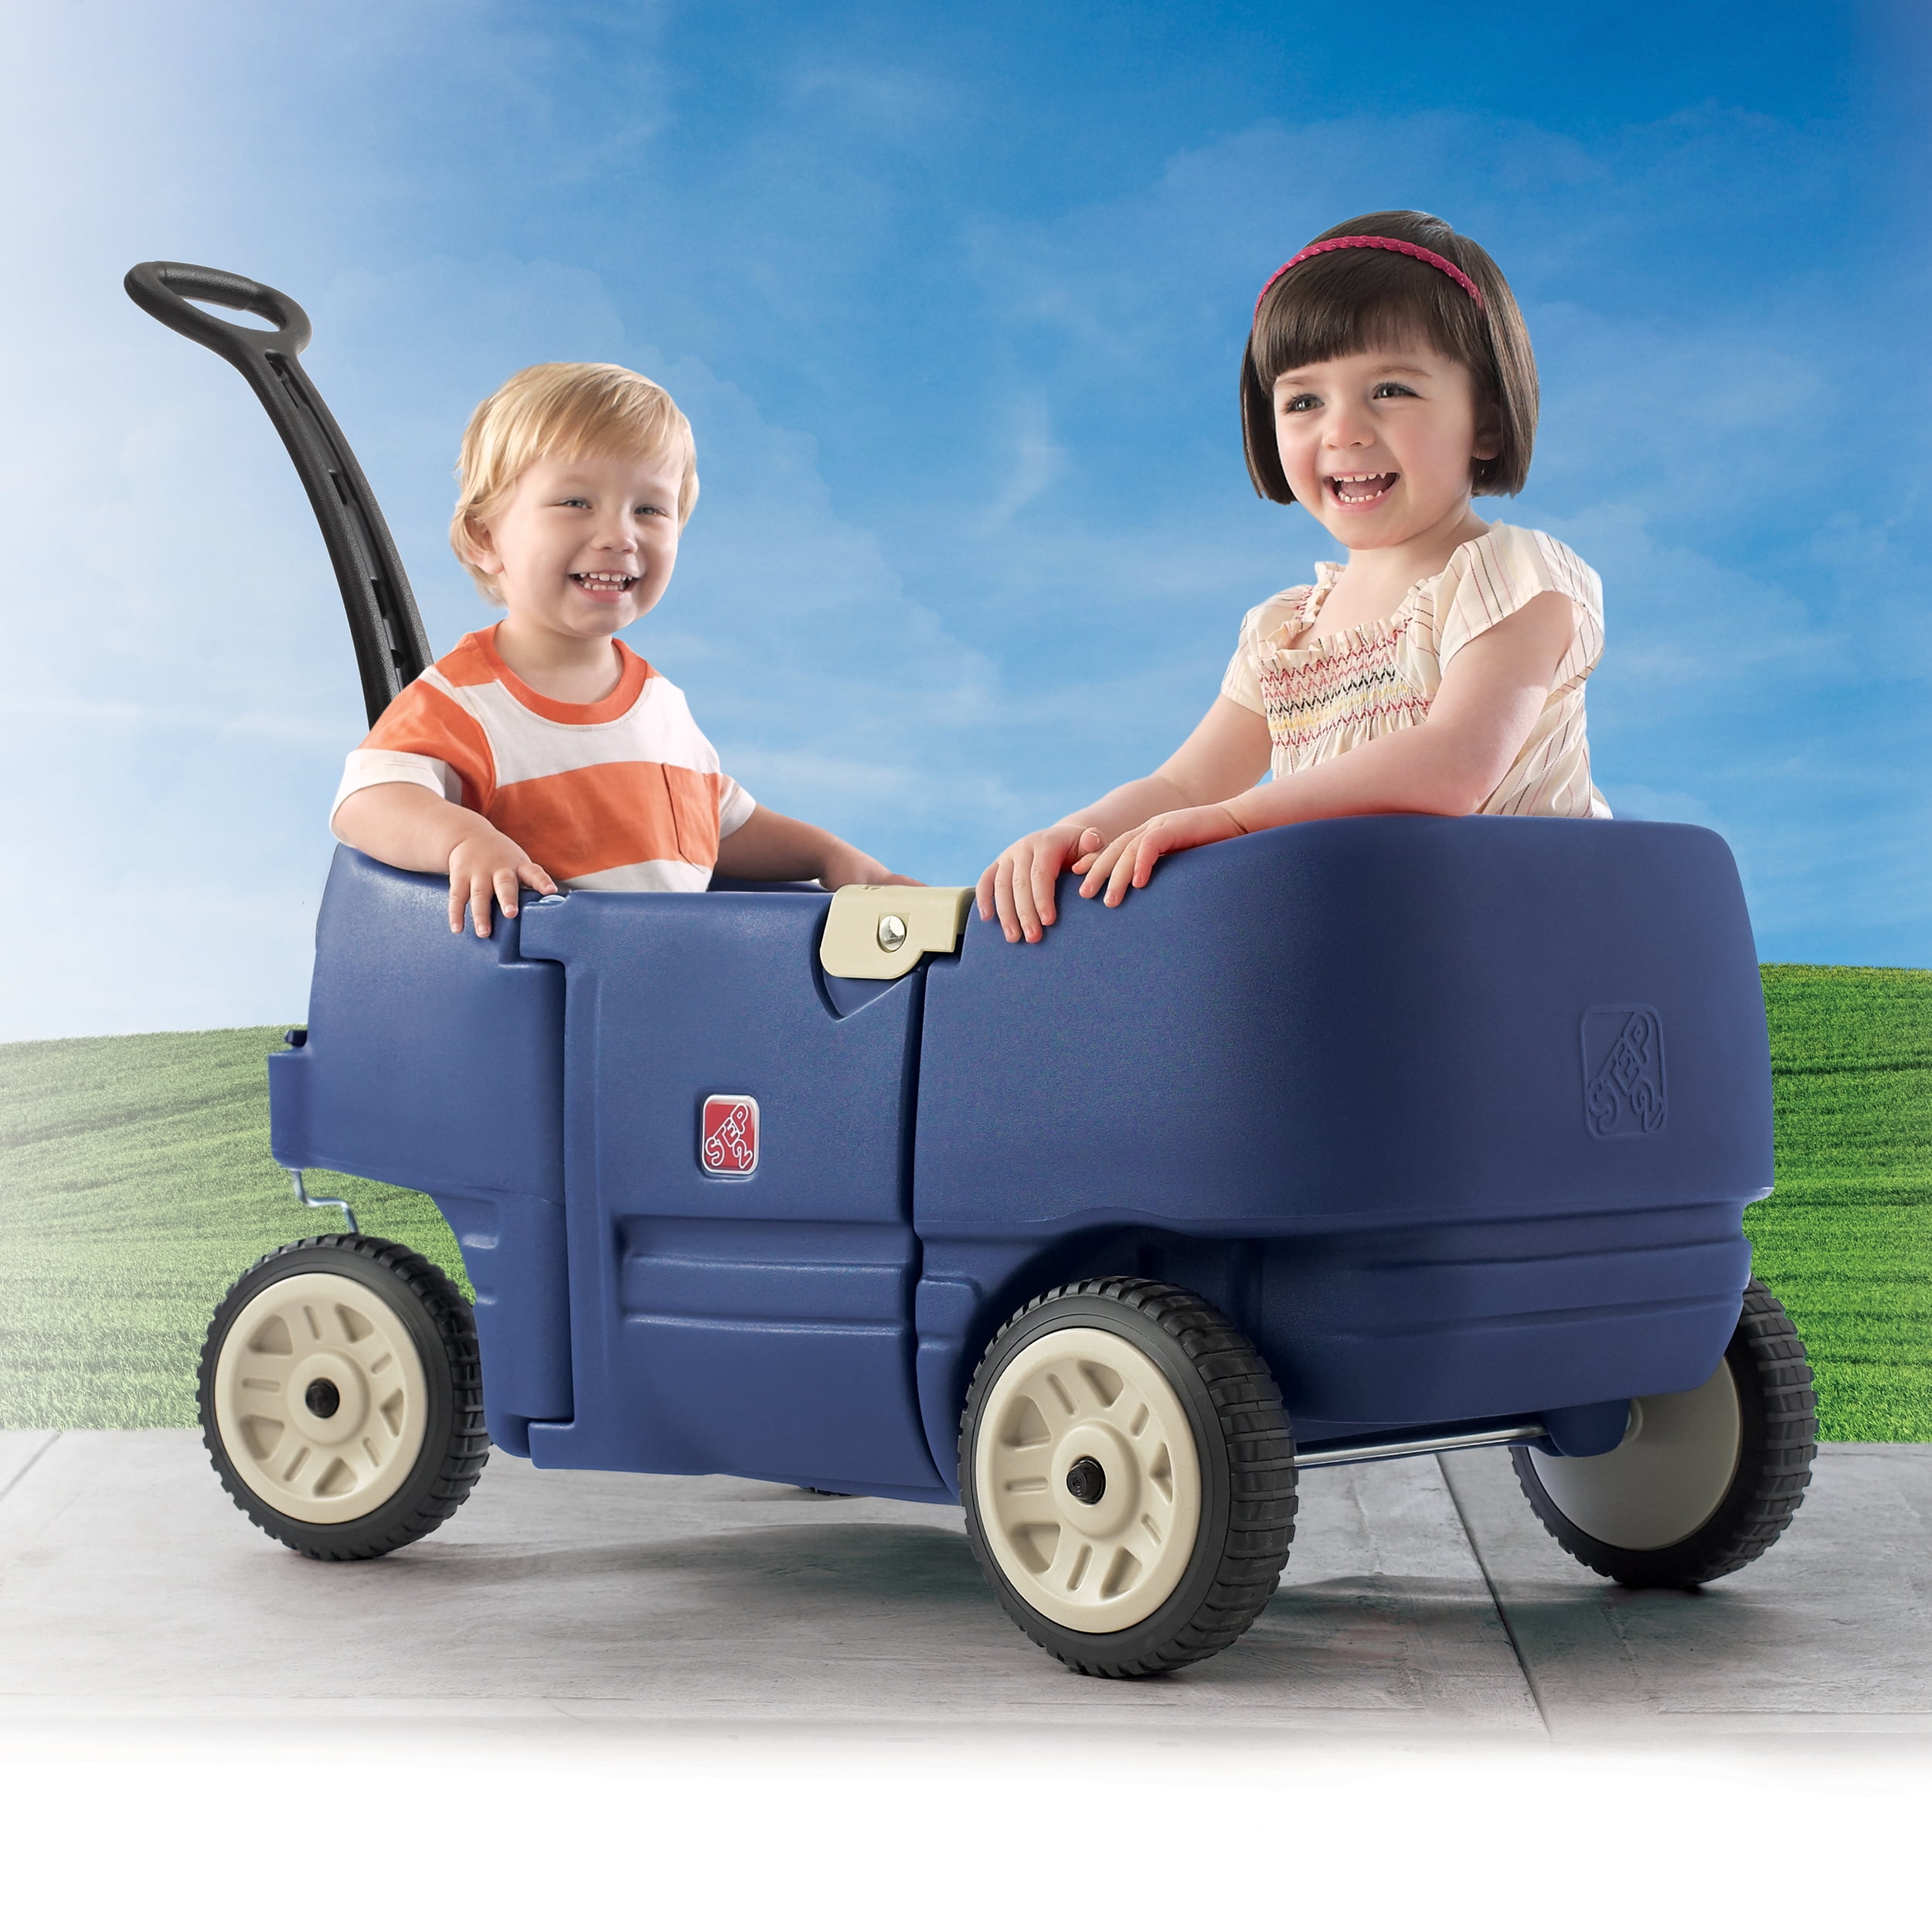 Step2 Wagon for Two Plus Pull Wagon for Kids, Blue - 1